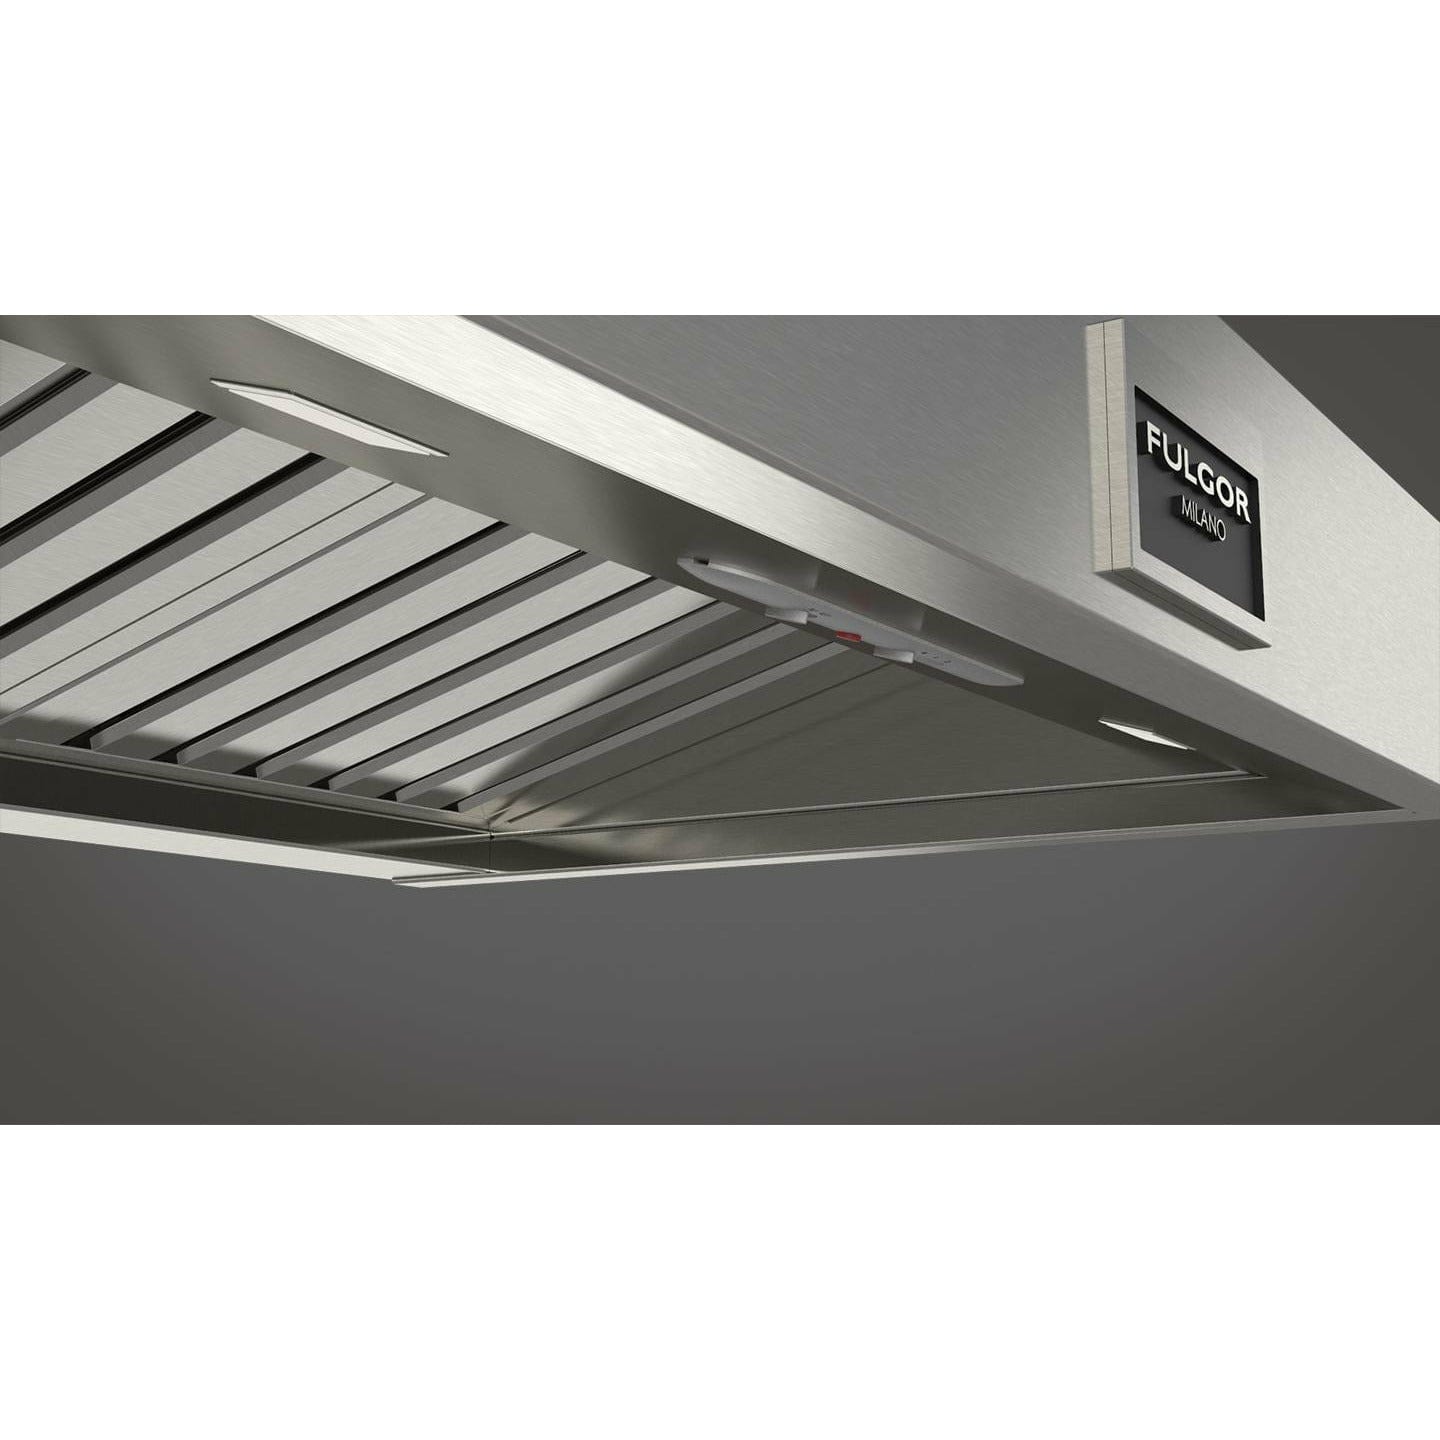 Fulgor Milano 30" Professional Wall Mount Hood with 600 CFM Internal Blower, Stainless Steel - F6PH30S1 Hoods F6PH30S1 Luxury Appliances Direct